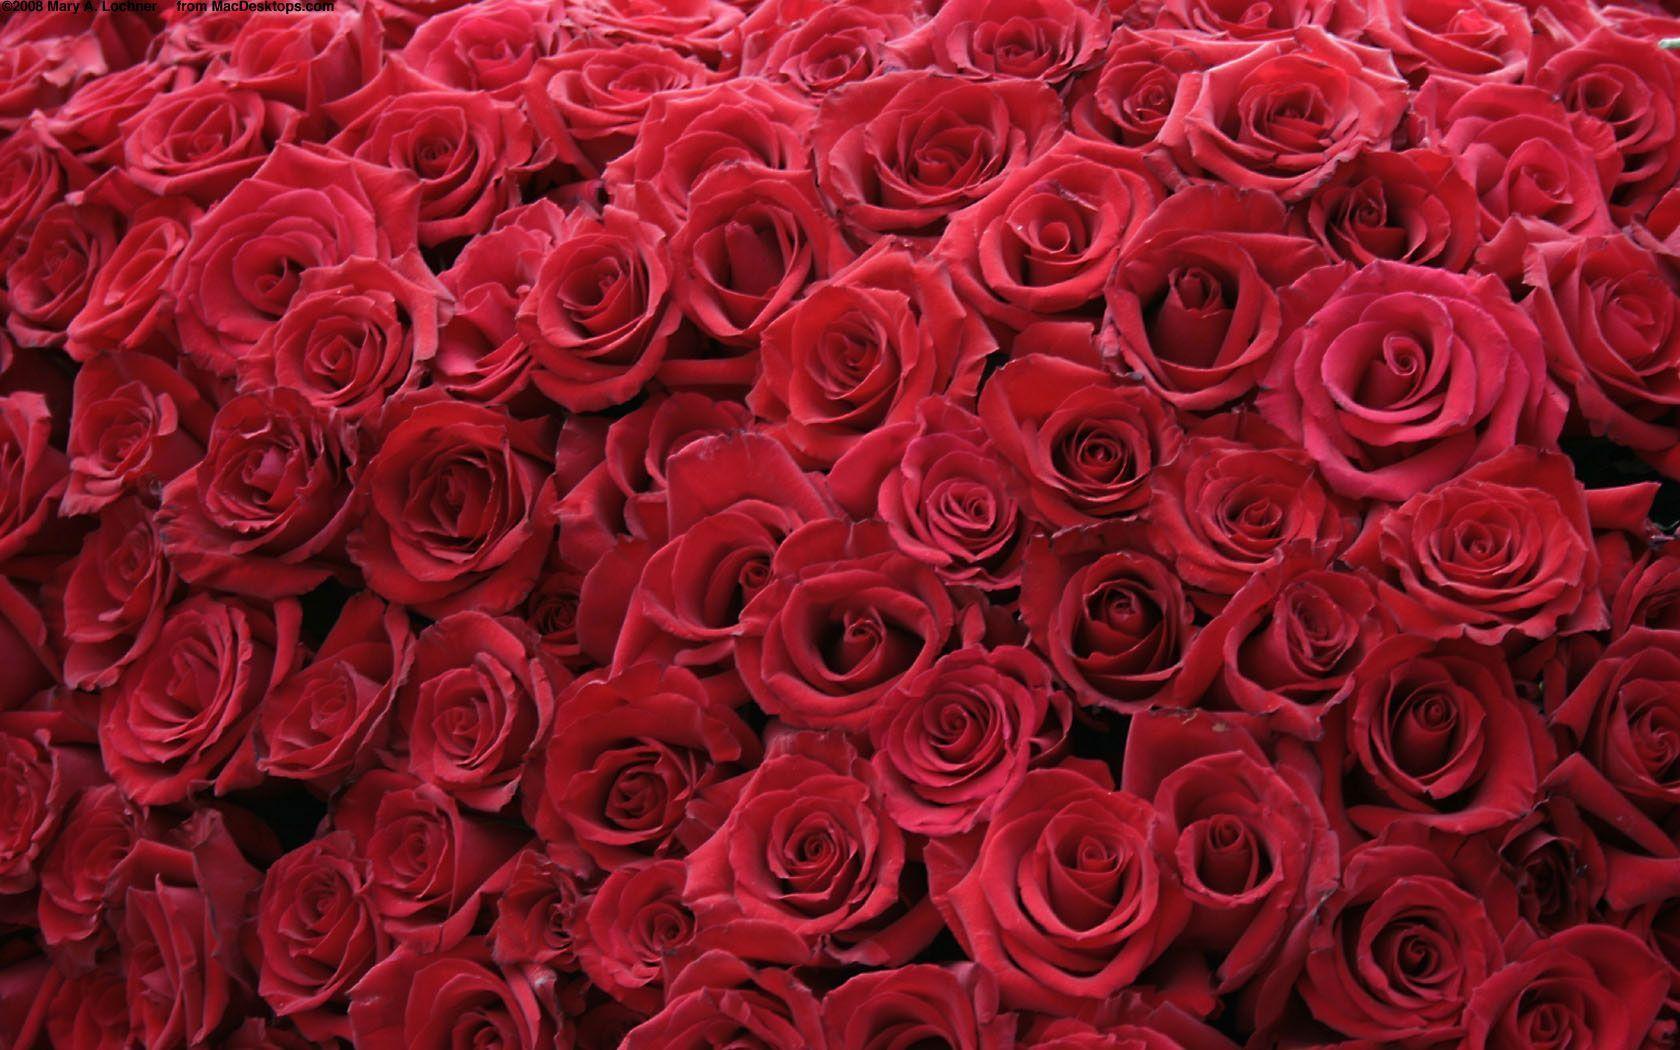 Red Abstract Roses Free Wallpaper 1680x1050PX Wallpaper Free